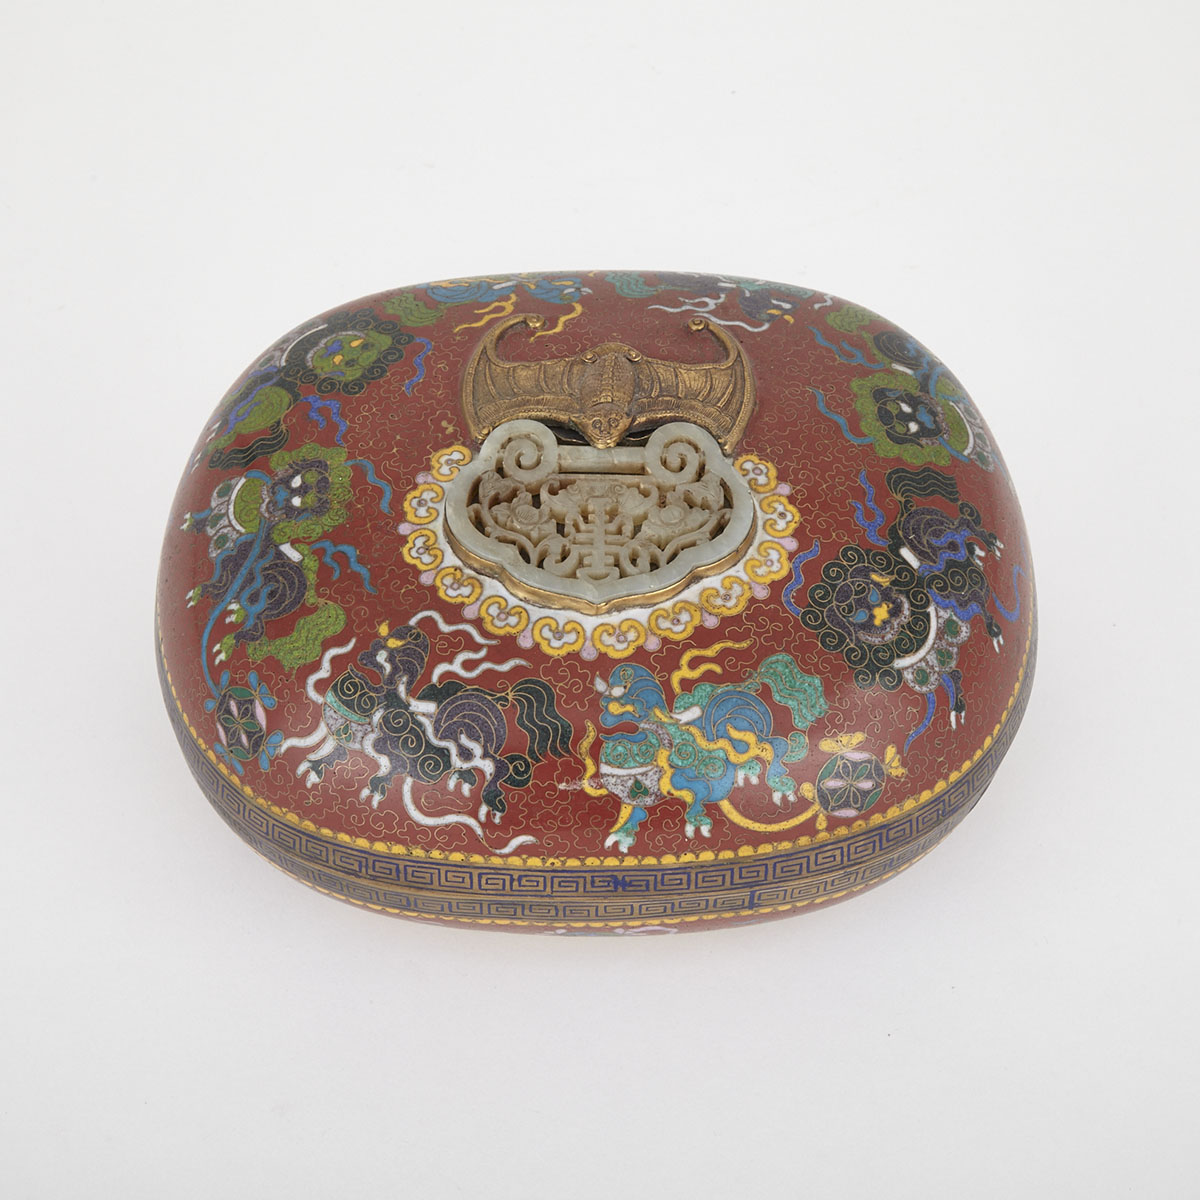 Cloisonne Box with Bat and Jade Plaque (Jade 19th Century, Box Early 20th Century)